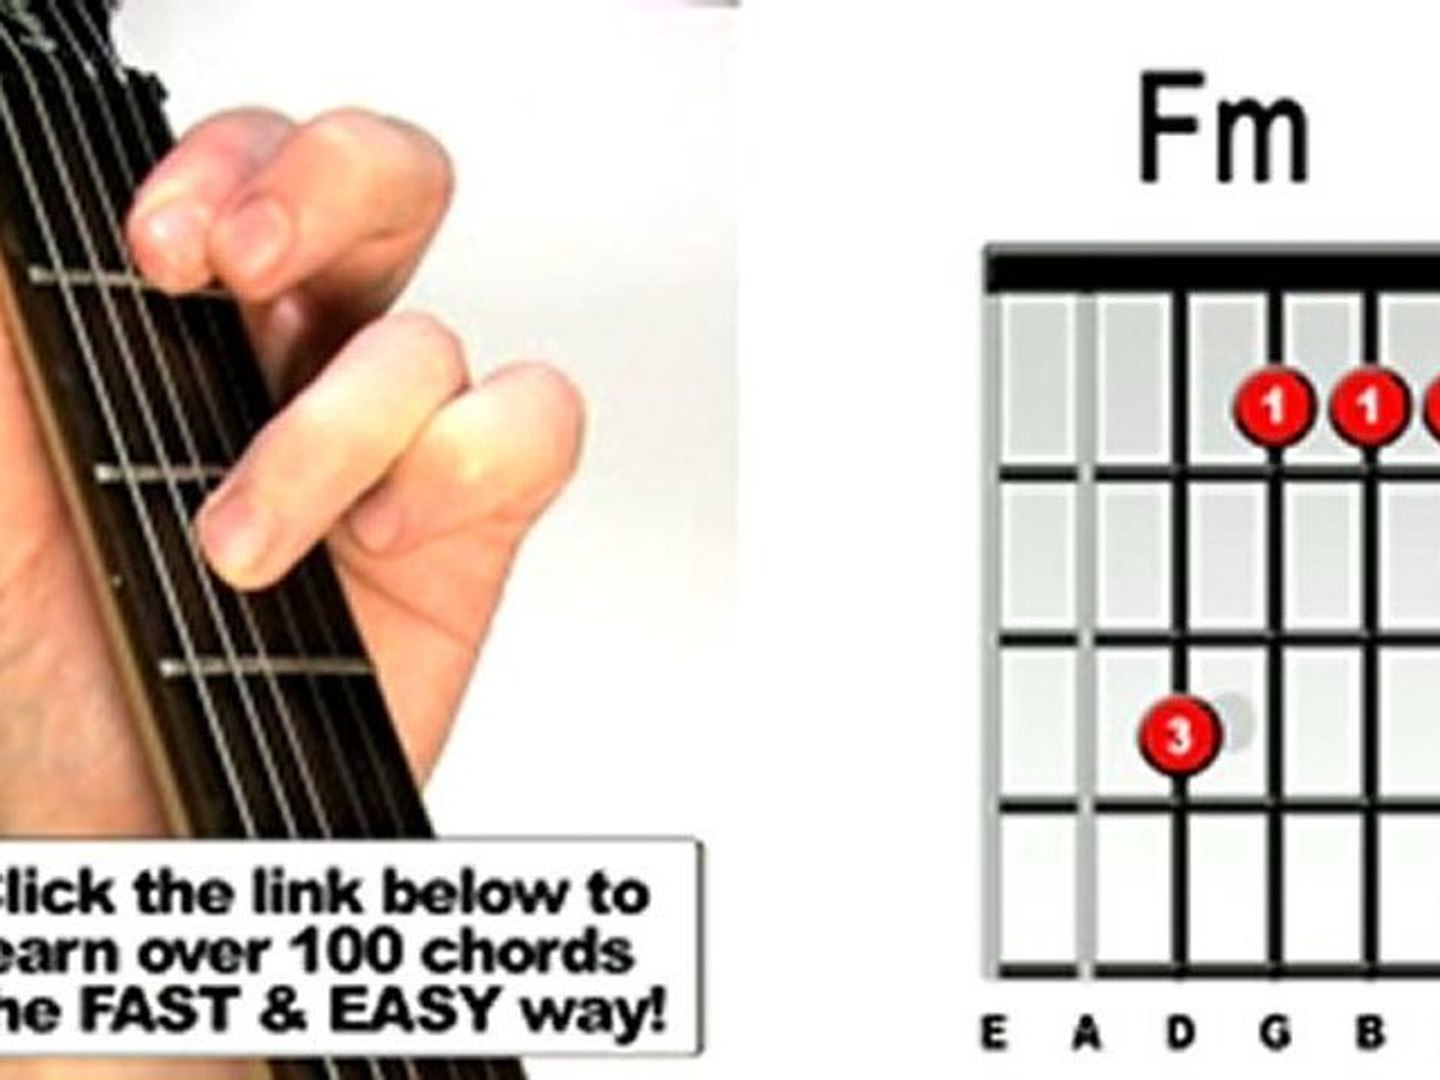 4 Ways to Play the Cm Guitar Chord